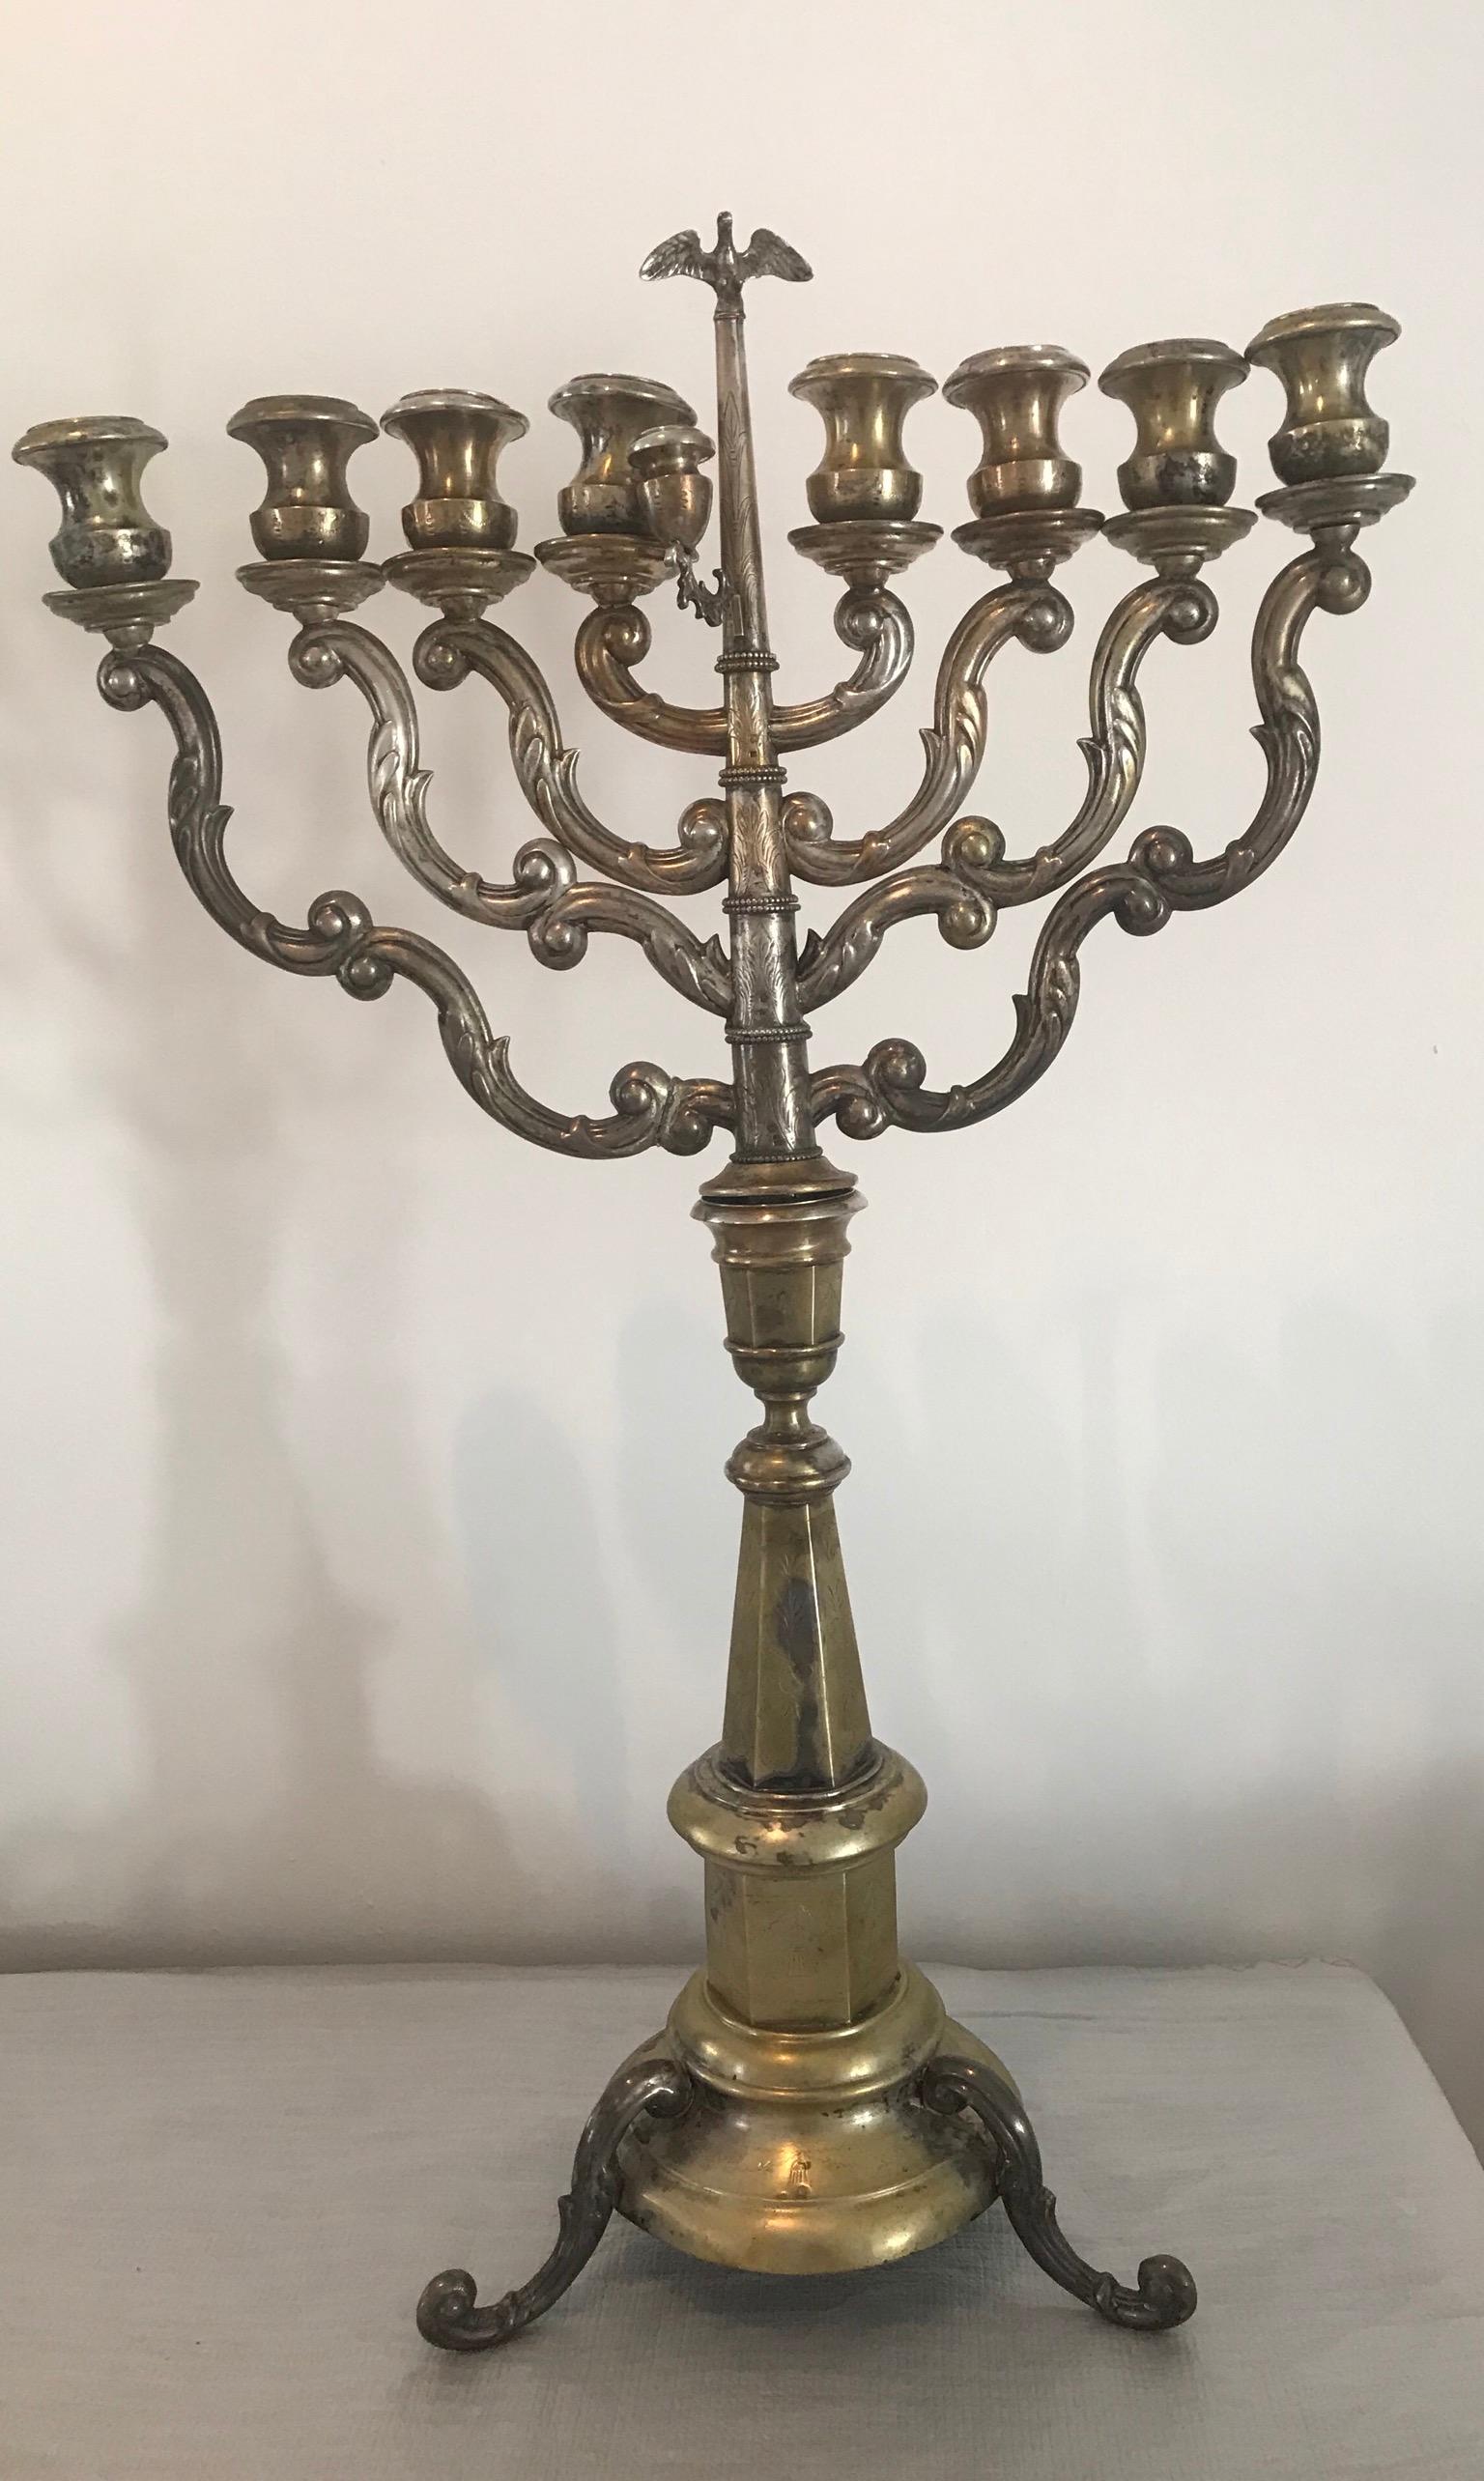 Large impressive 19th century antique silver menorah , great condition, repair to one arm at the connection.